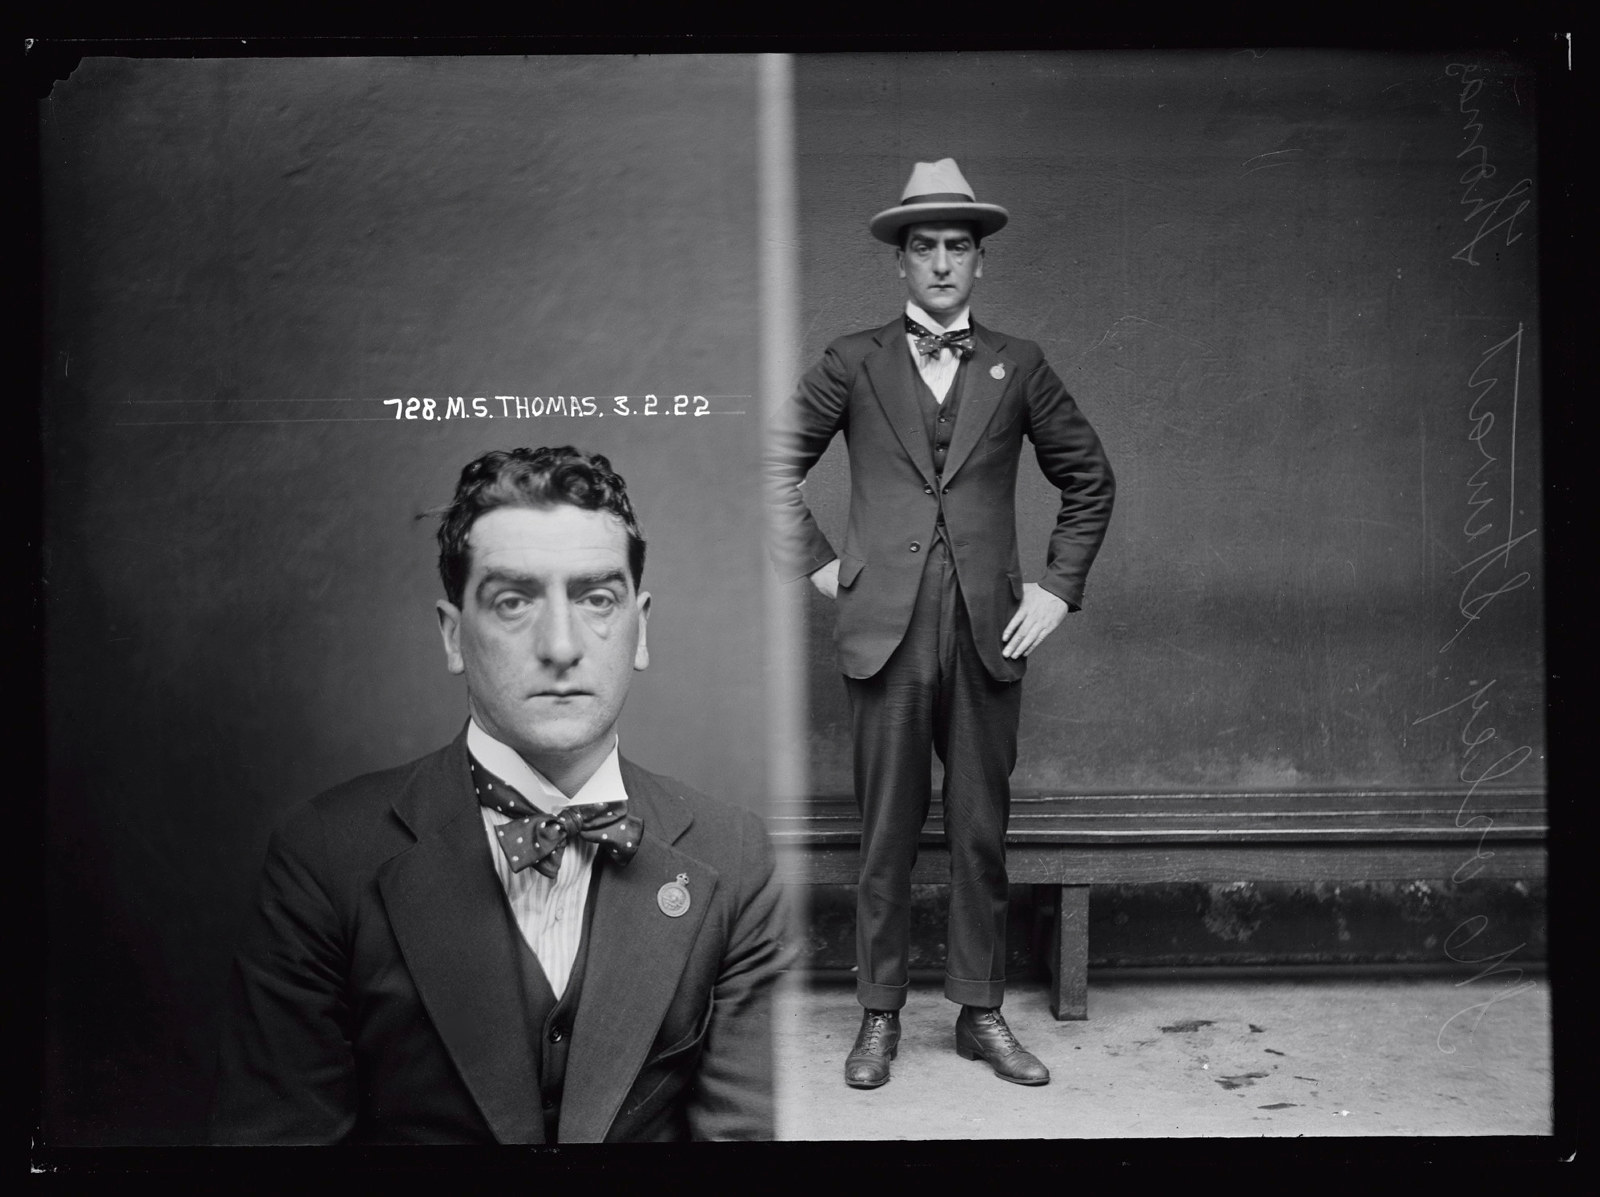 Dual black and white mugshot; man seated, left and standing with hat on, right.